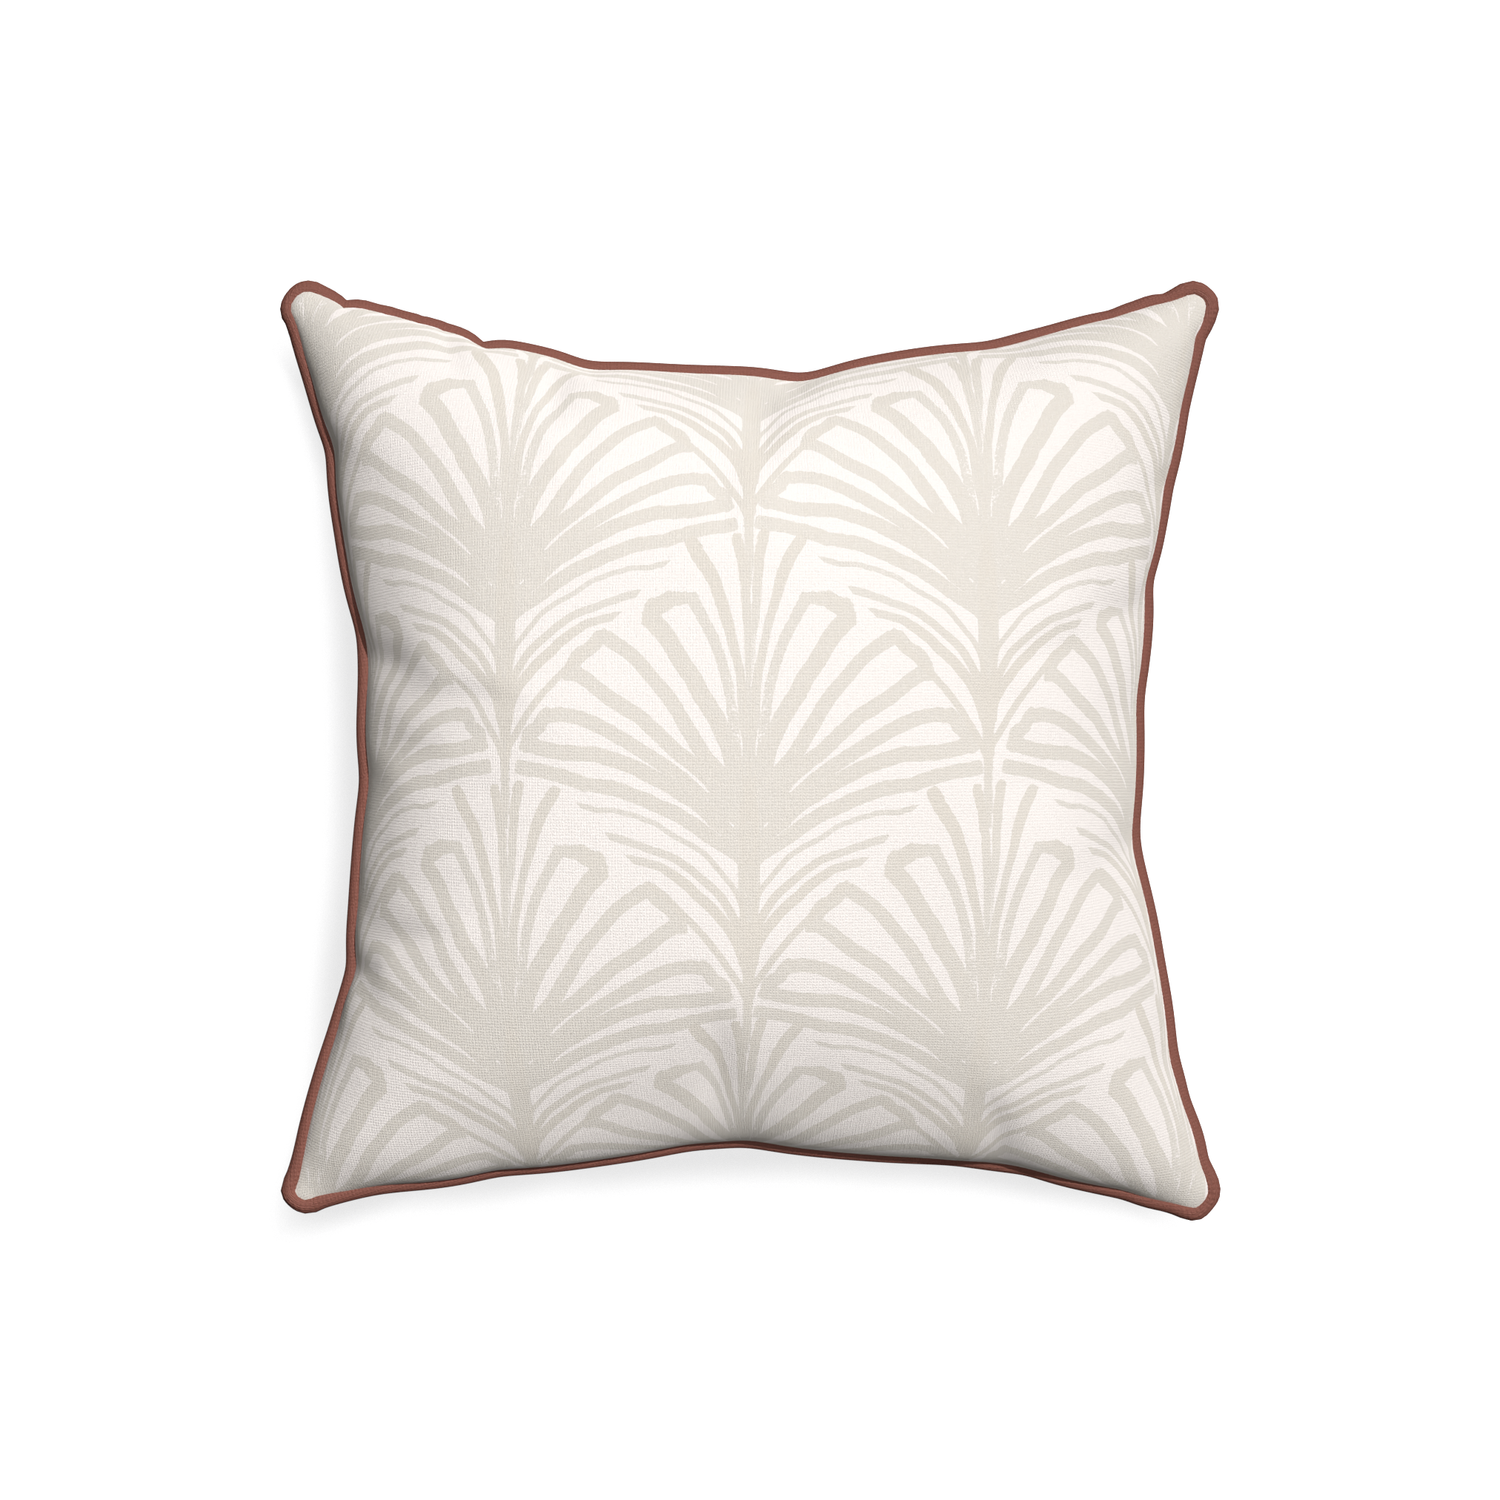 20-square suzy sand custom pillow with w piping on white background